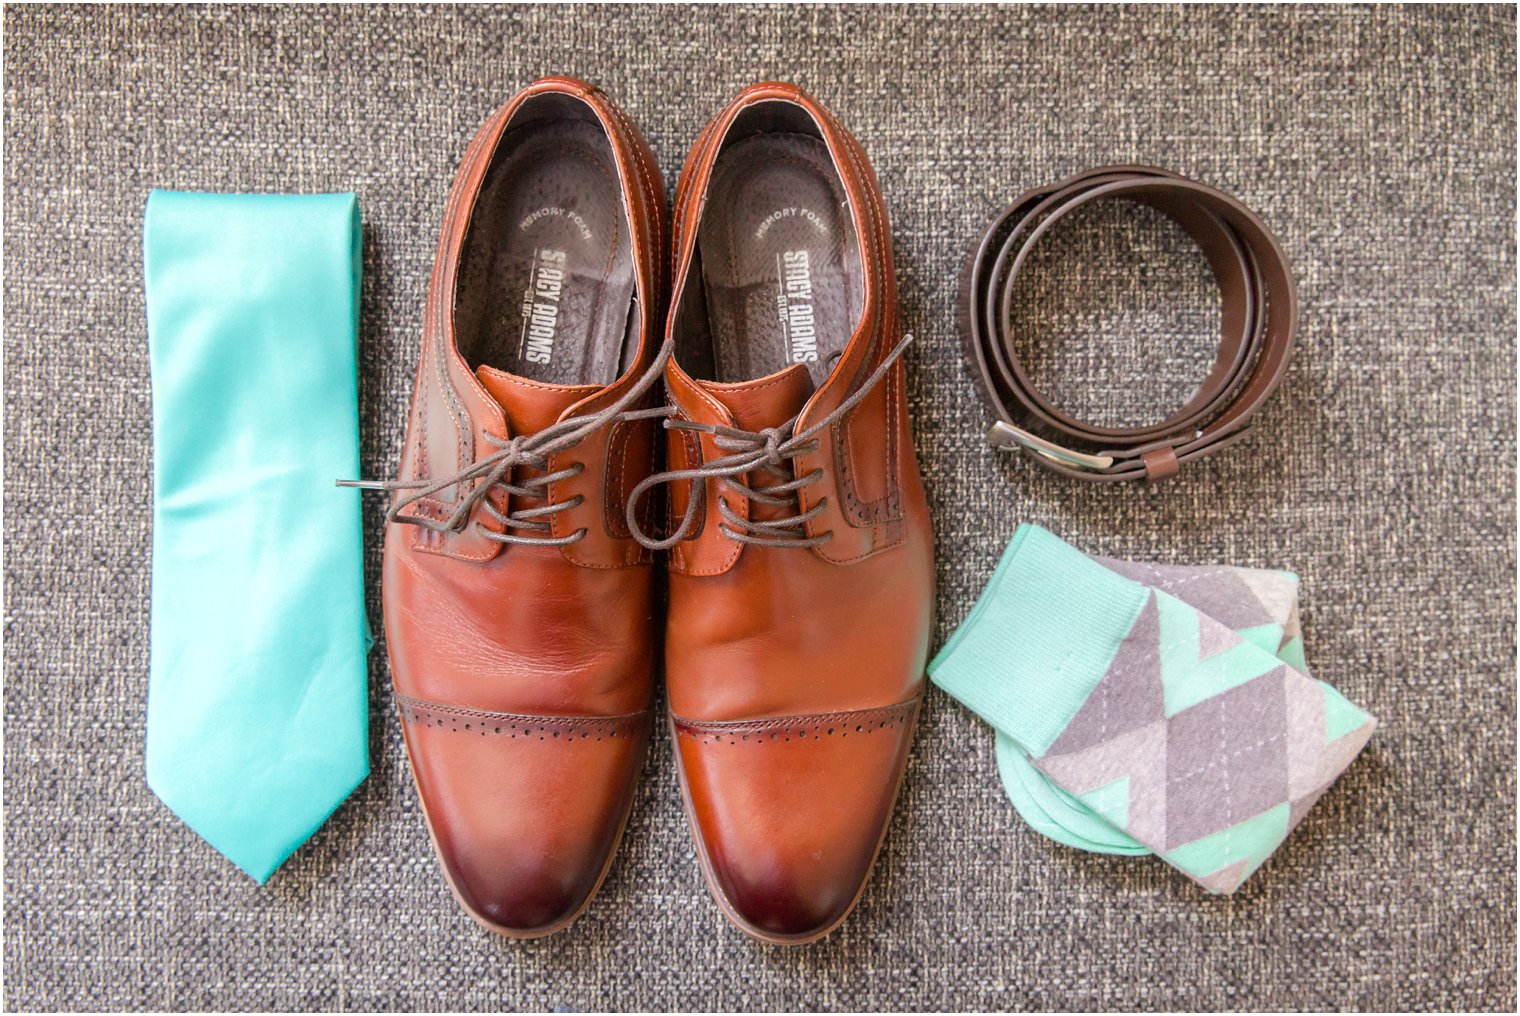 turquoise groomsman tie and socks with brown shoes on wedding day